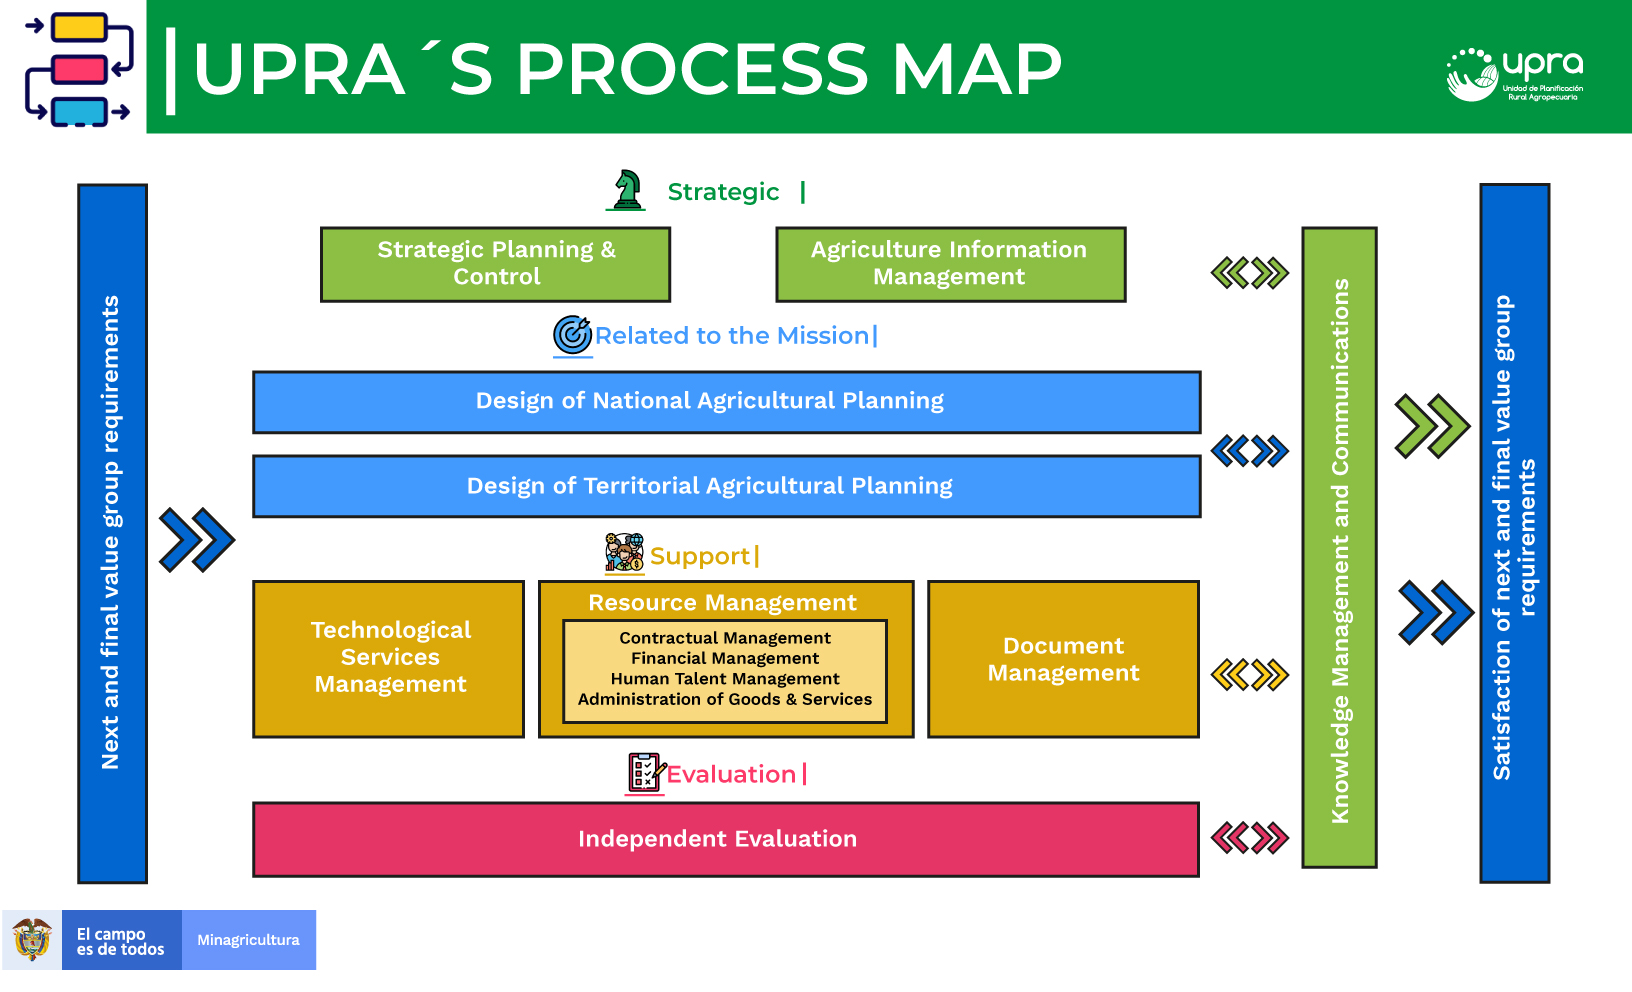 Graphic process map